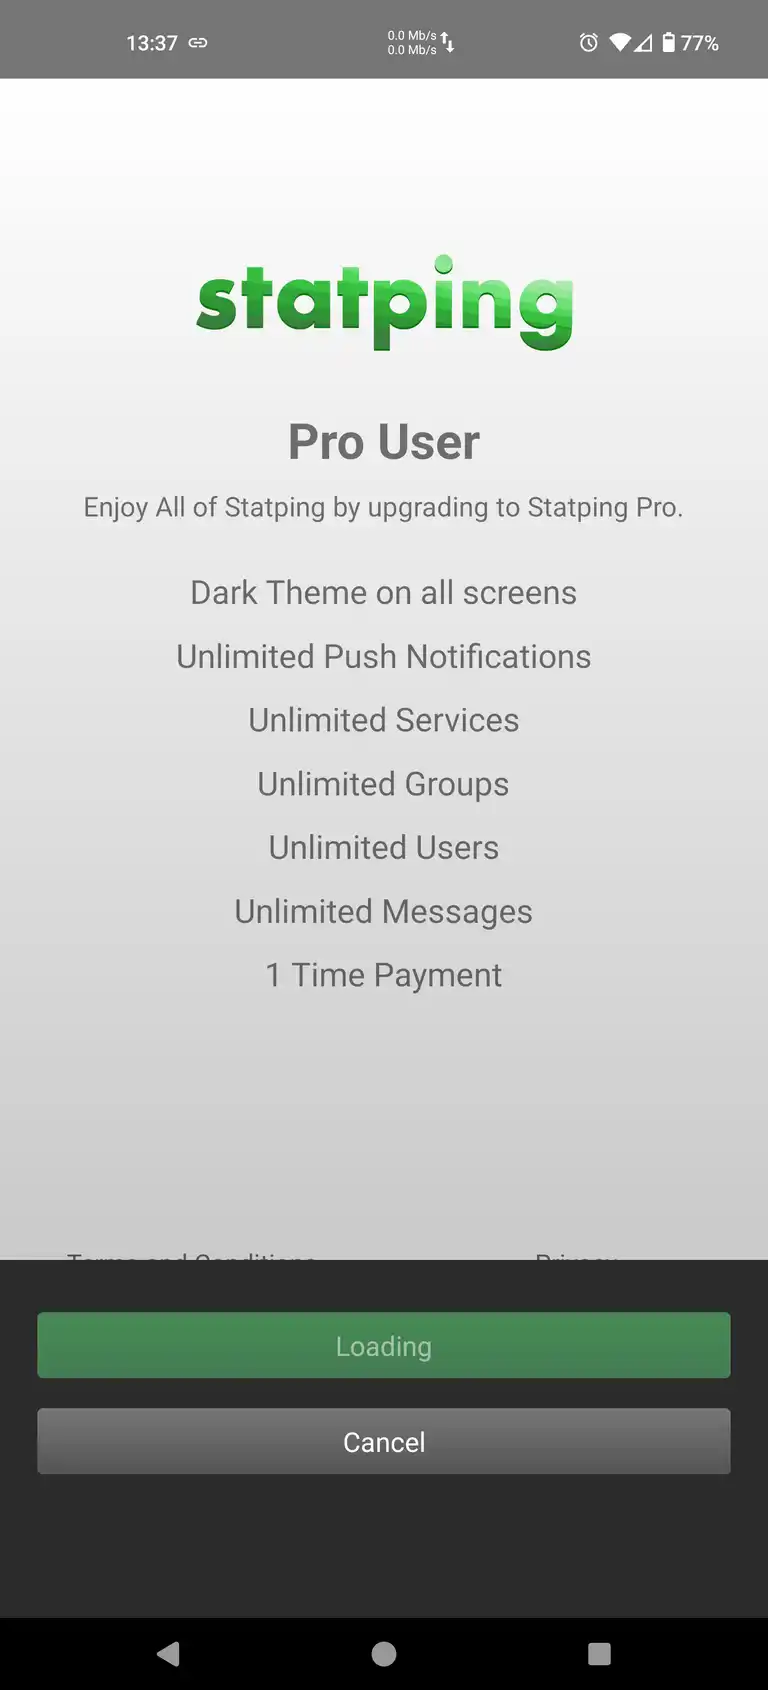 showinStatping android app showing benefits of pro version